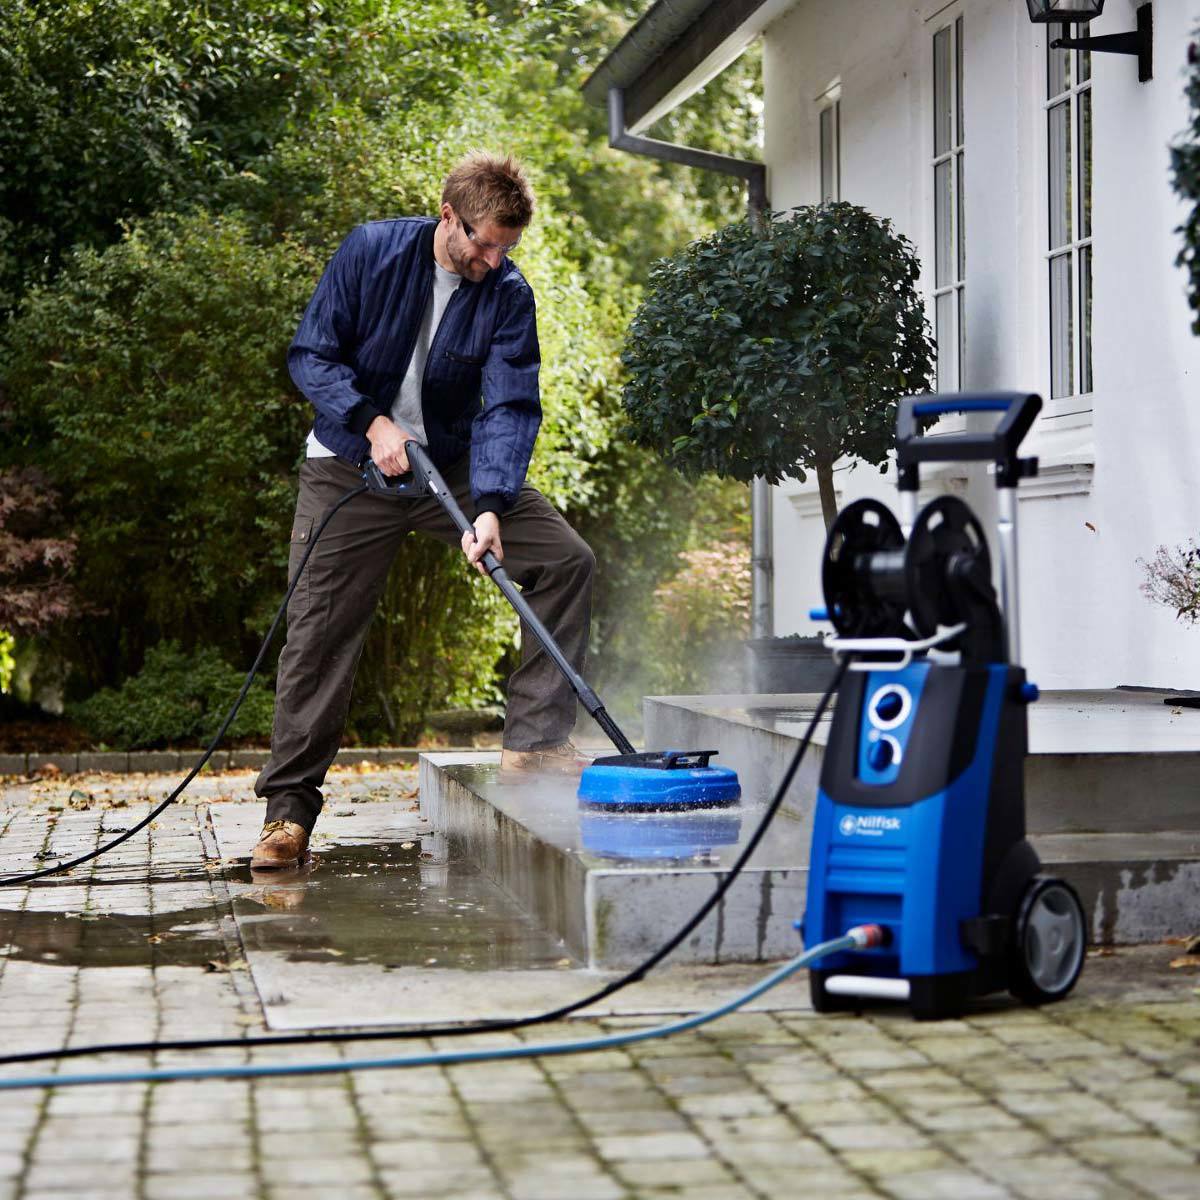 Lifestyle image of pressure washer being used to clean patio